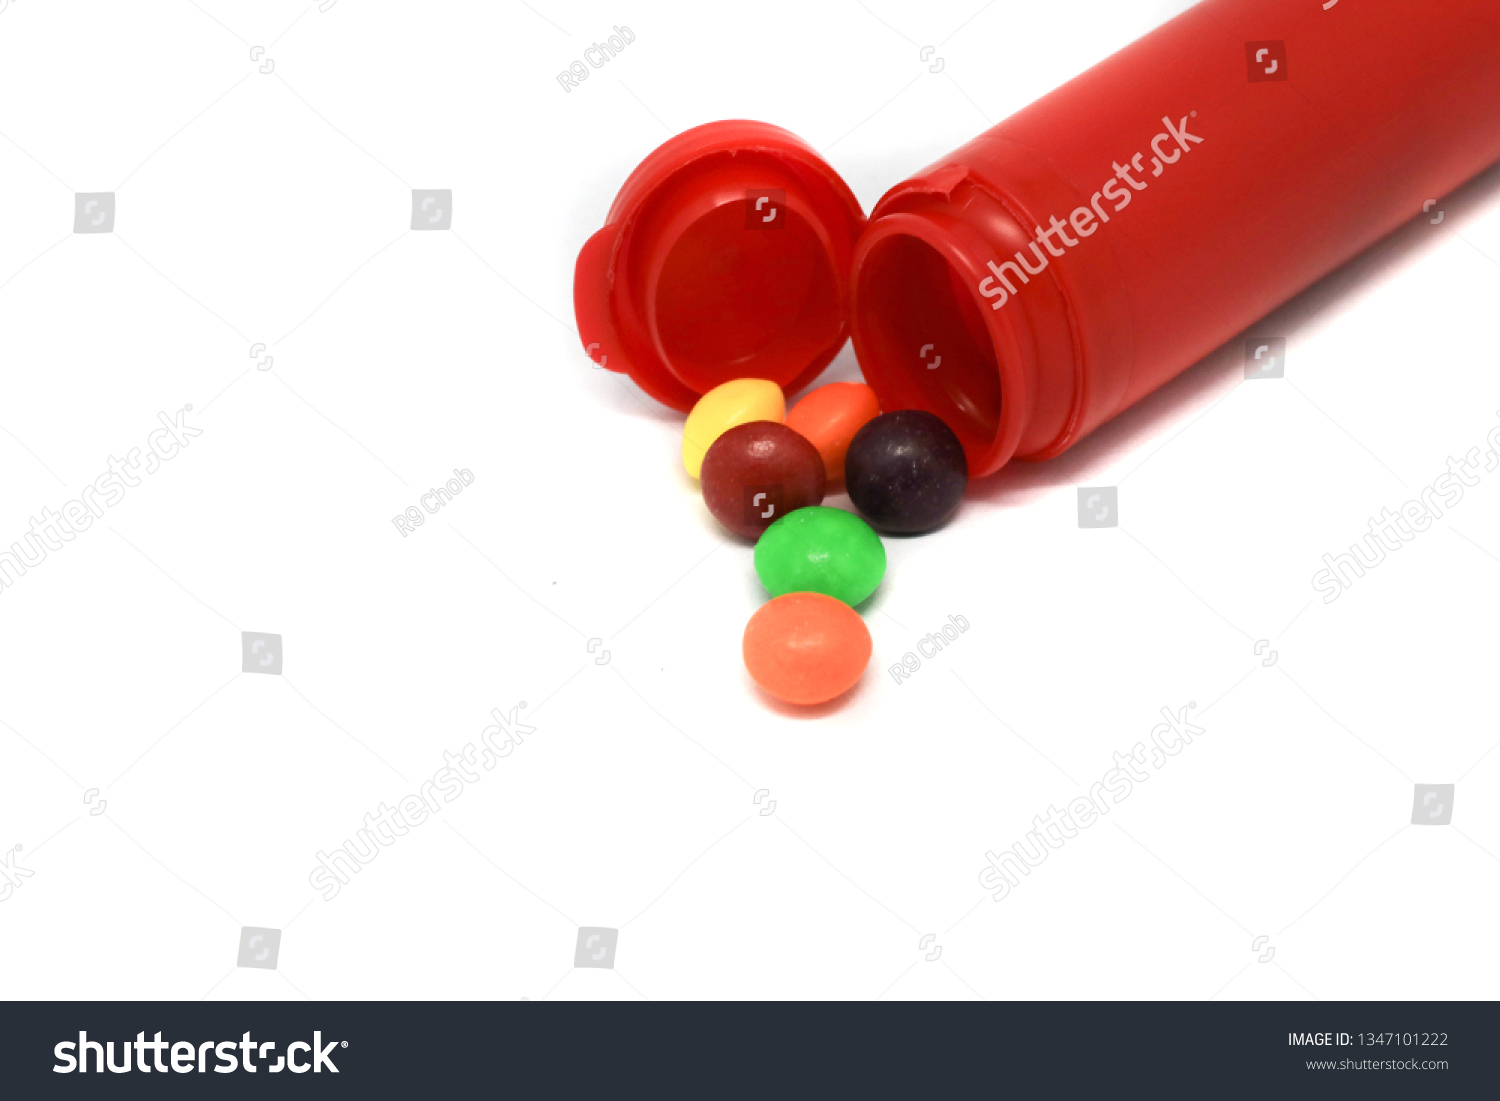 Colorful Chocolate Candies On White Background Stock Image